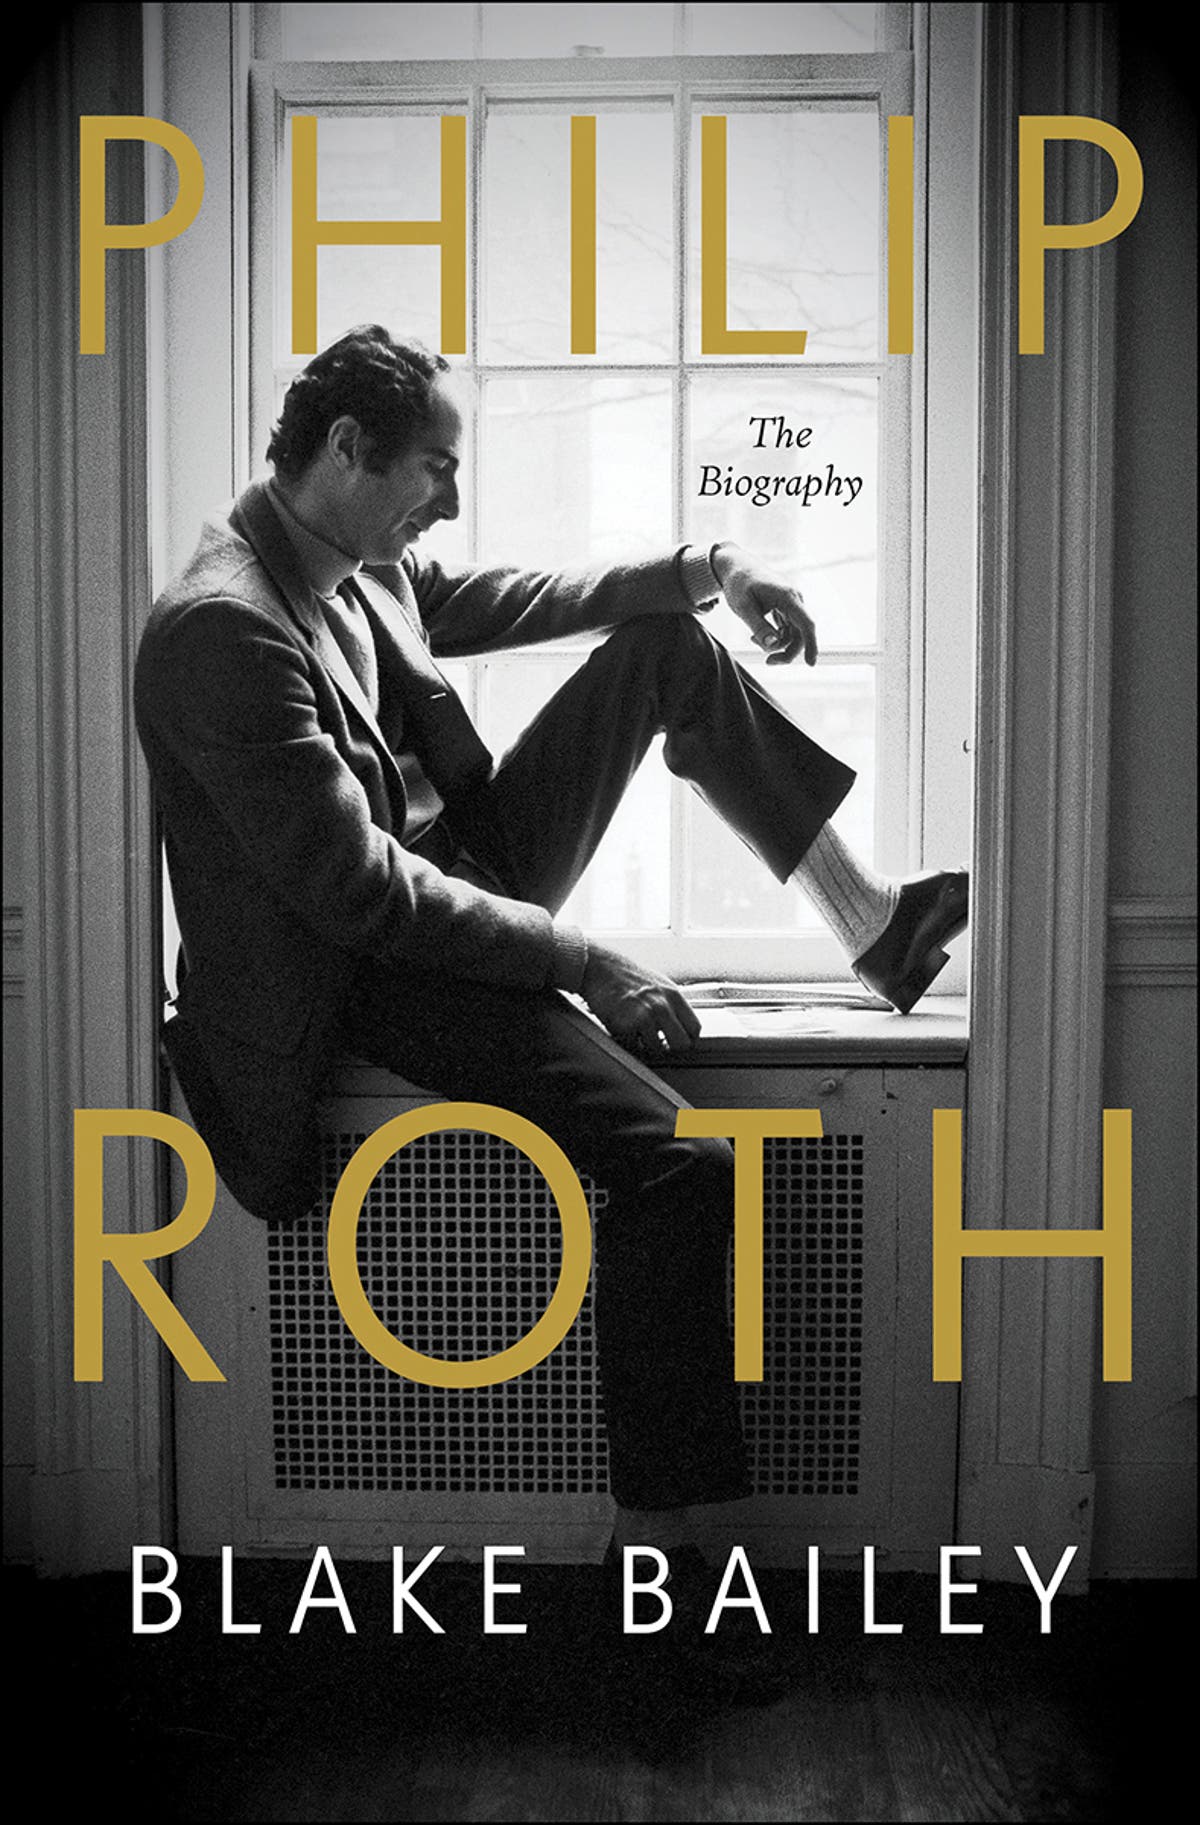 Publisher pauses release of new Philip Roth biography ...